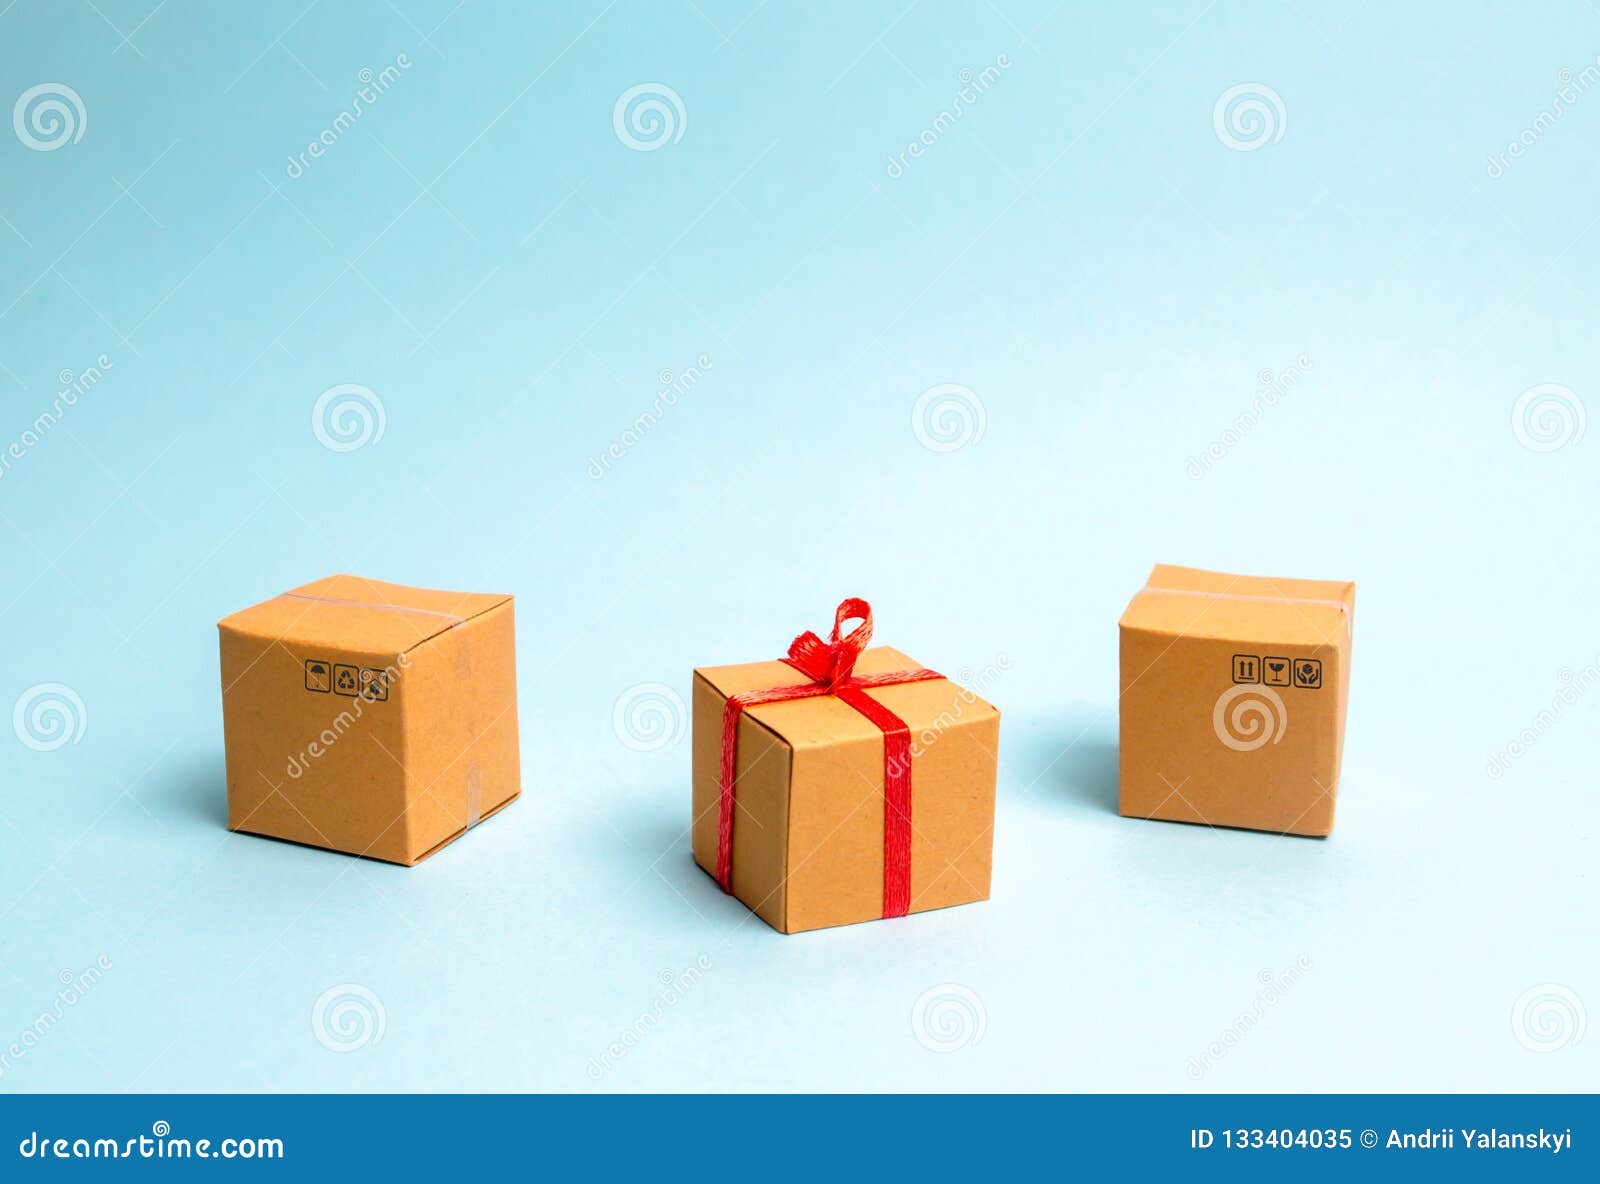 A Gift Box Lies among Other Boxes. the Concept of Selling Goods and ...